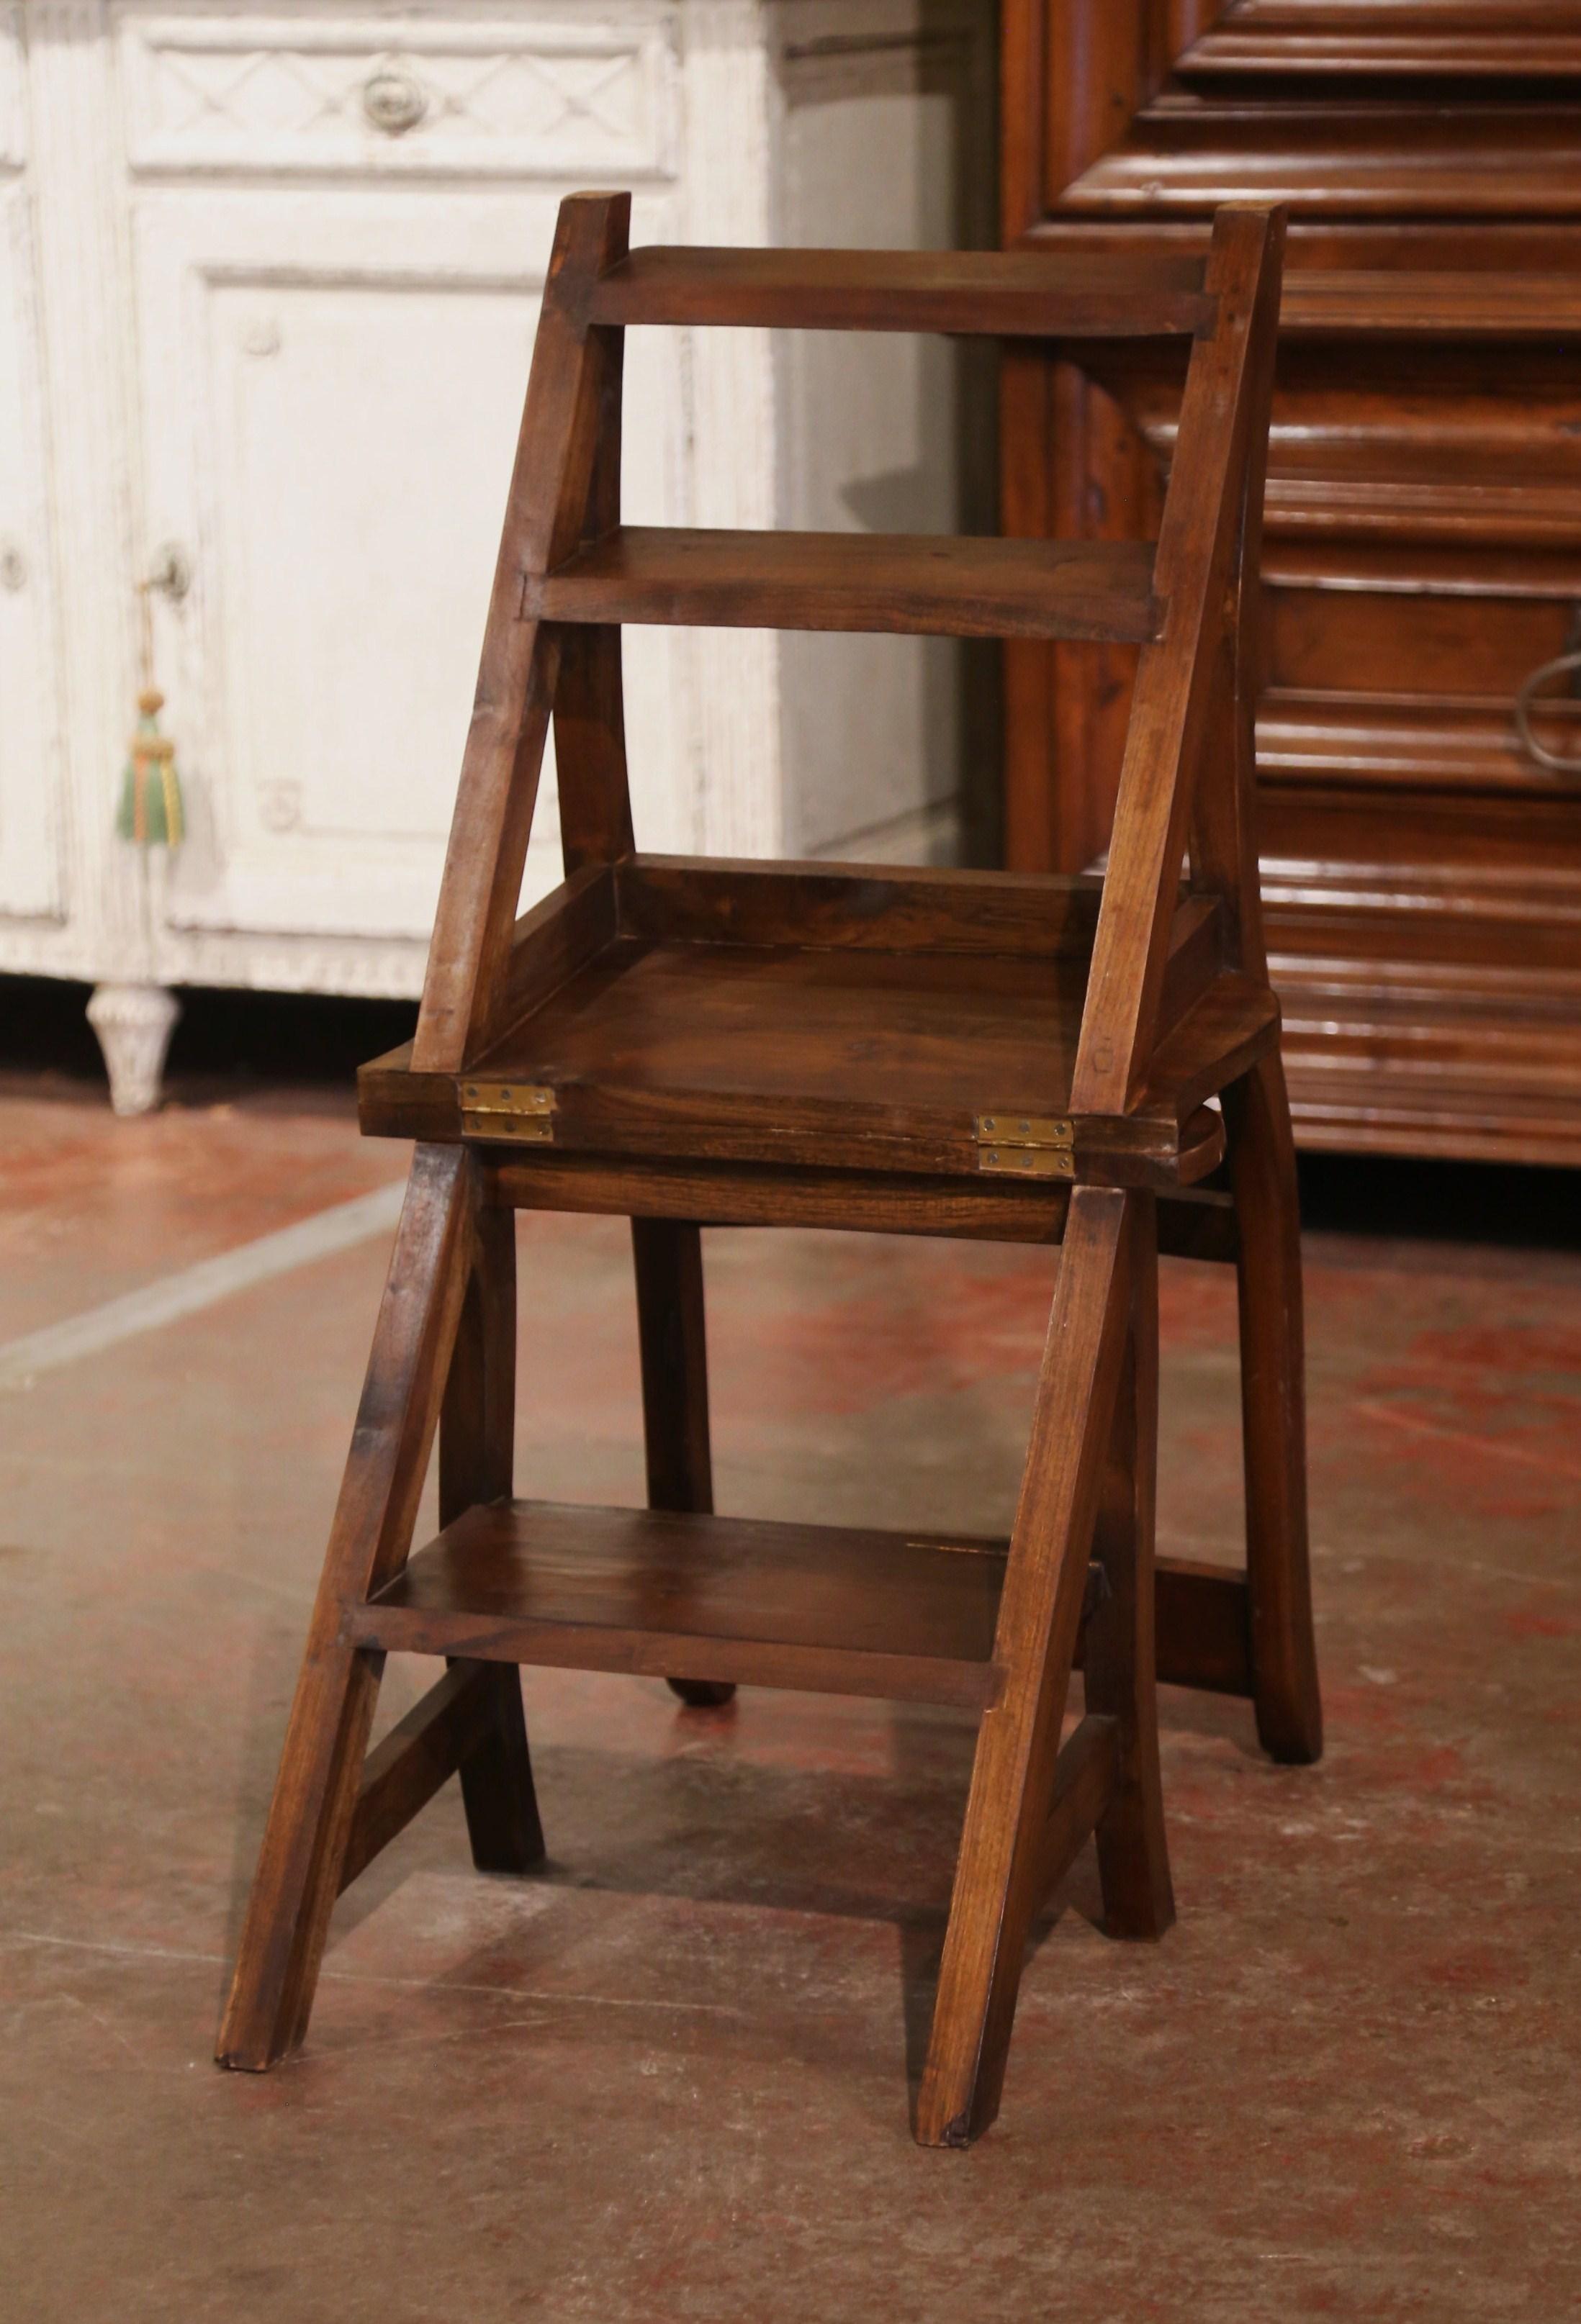 Decorate a library or study with this artisan-made folding step ladder chair. Crafted in Southern France circa 1890, the antique metamorphic chair features four carved ladders in the back; the double-function piece is hinged so that it can convert